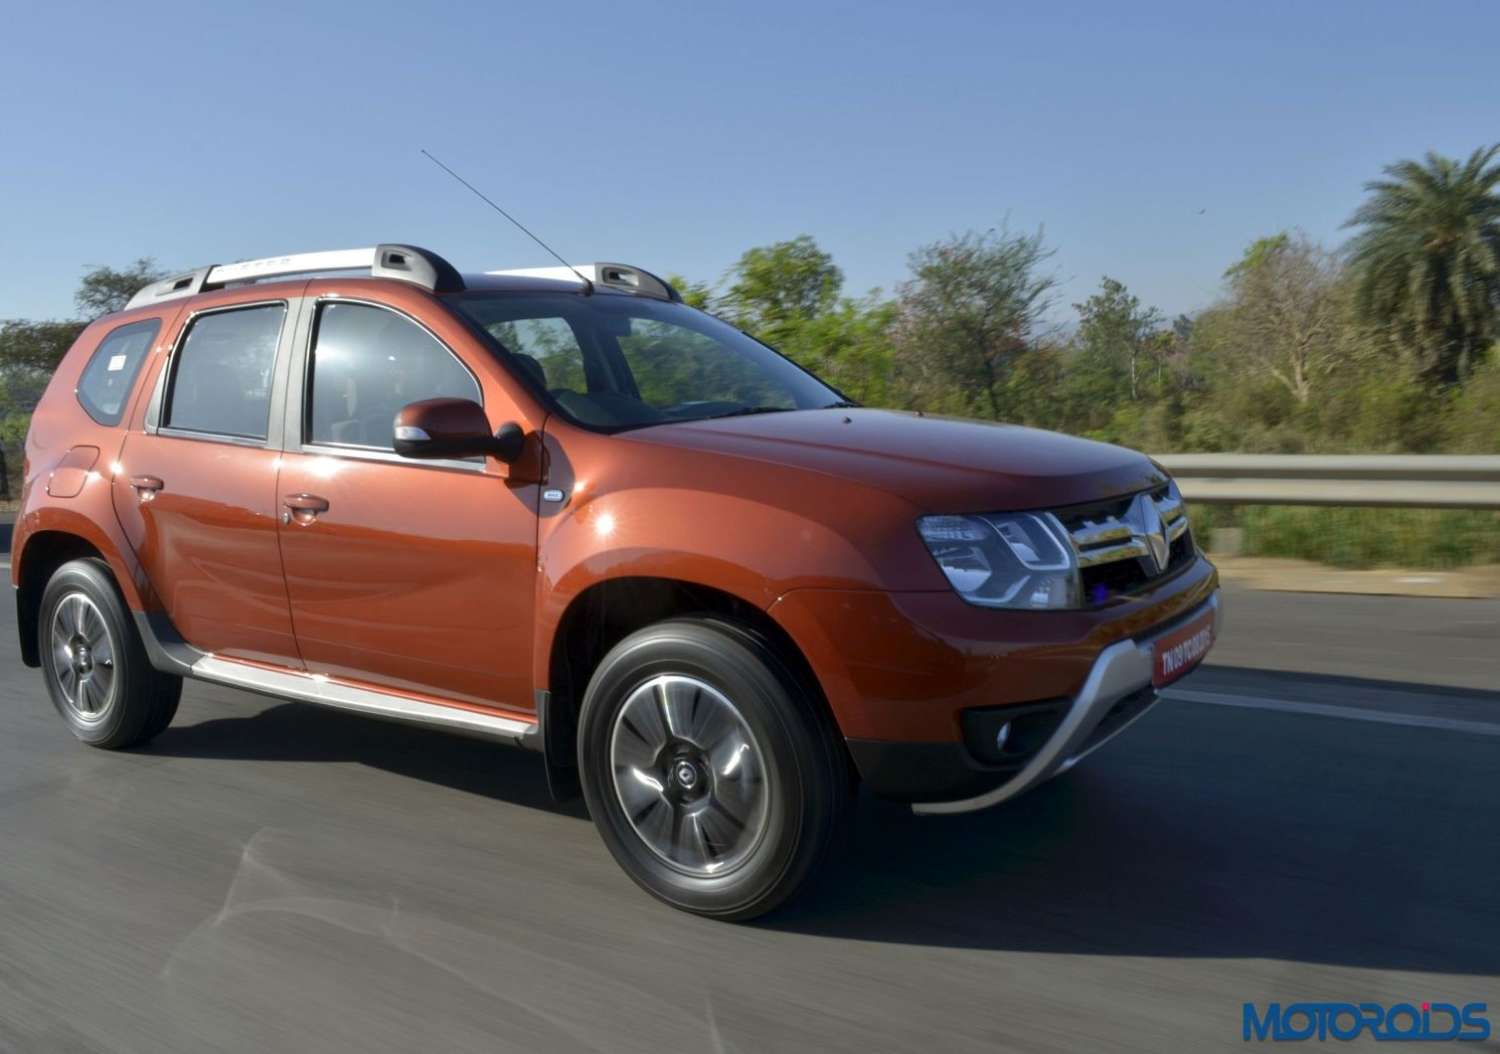 New 2016 Renault Duster In motion (4)